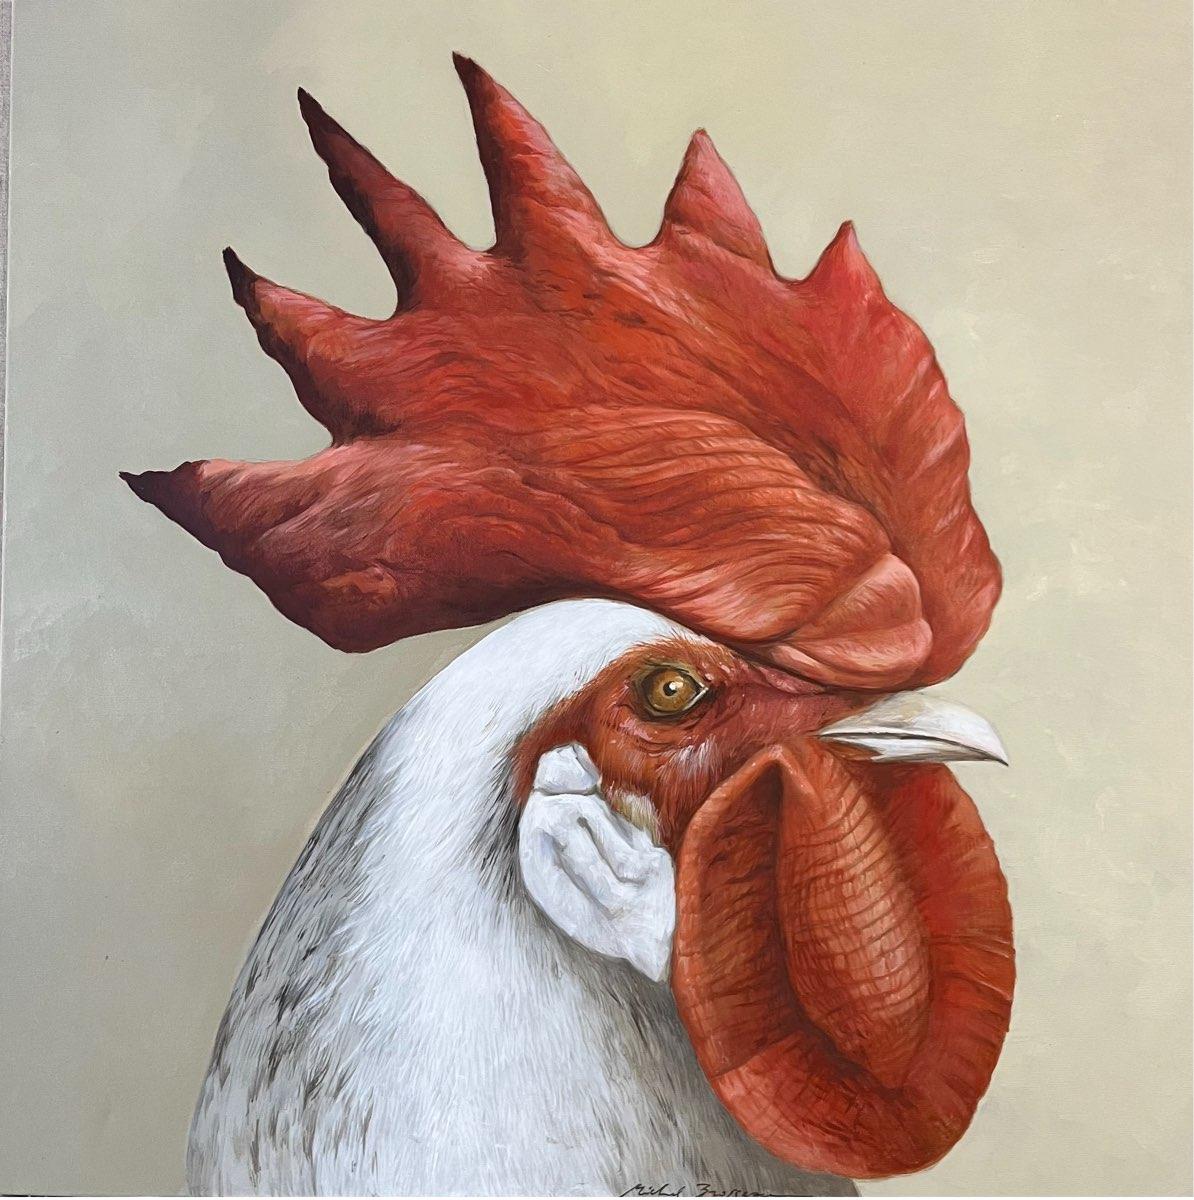 Michel Brosseau Still-Life Painting - "Liberté", a photorealist side profile of a rooster with a proud red features